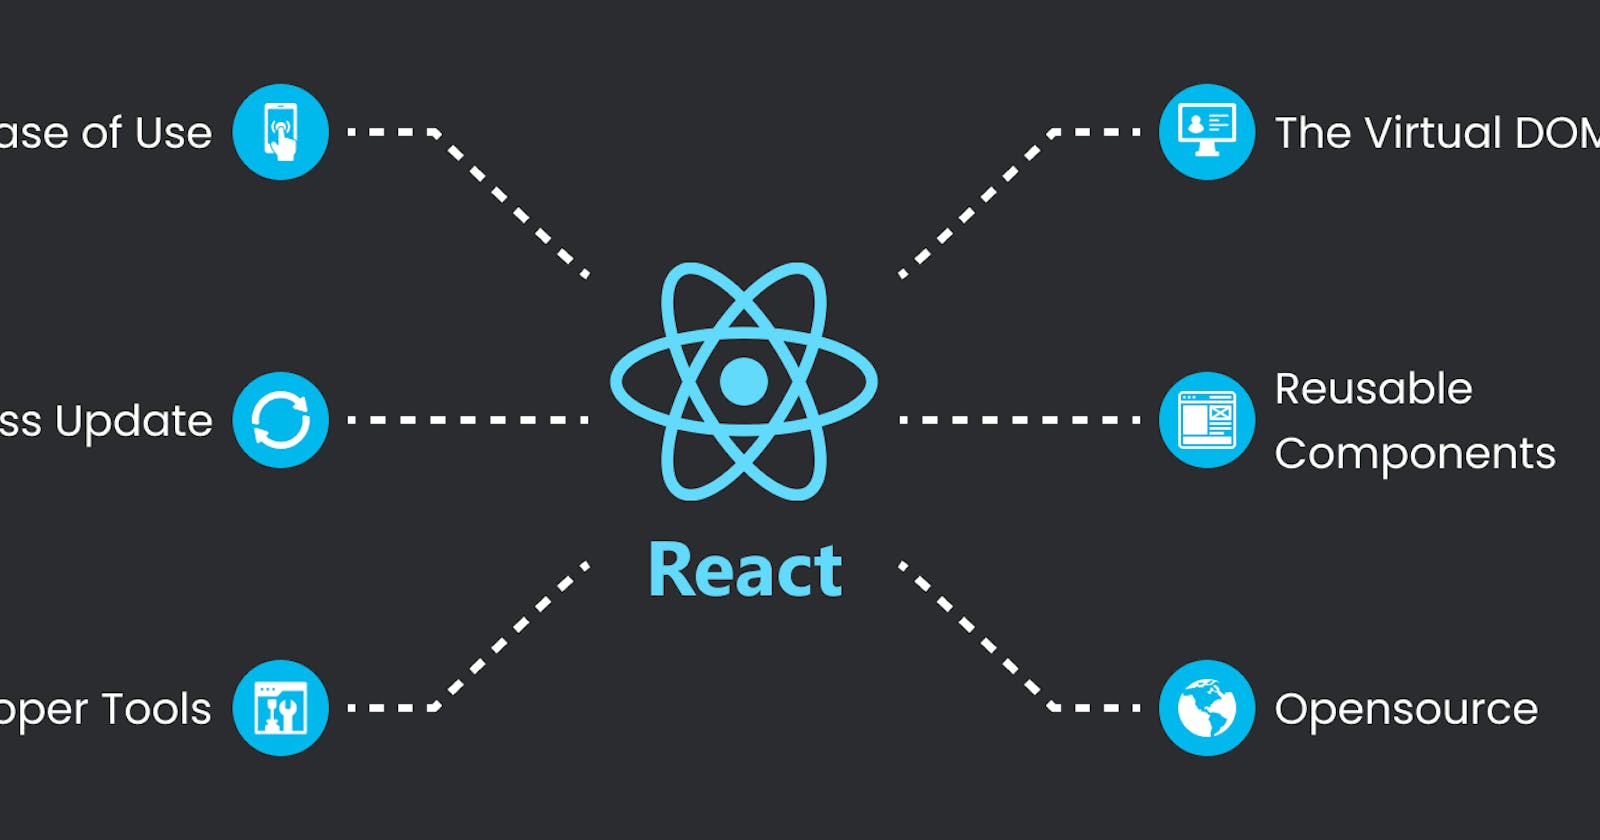 ReactJS: The Ultimate Choice for High-Performance and Flexible Front-End Development